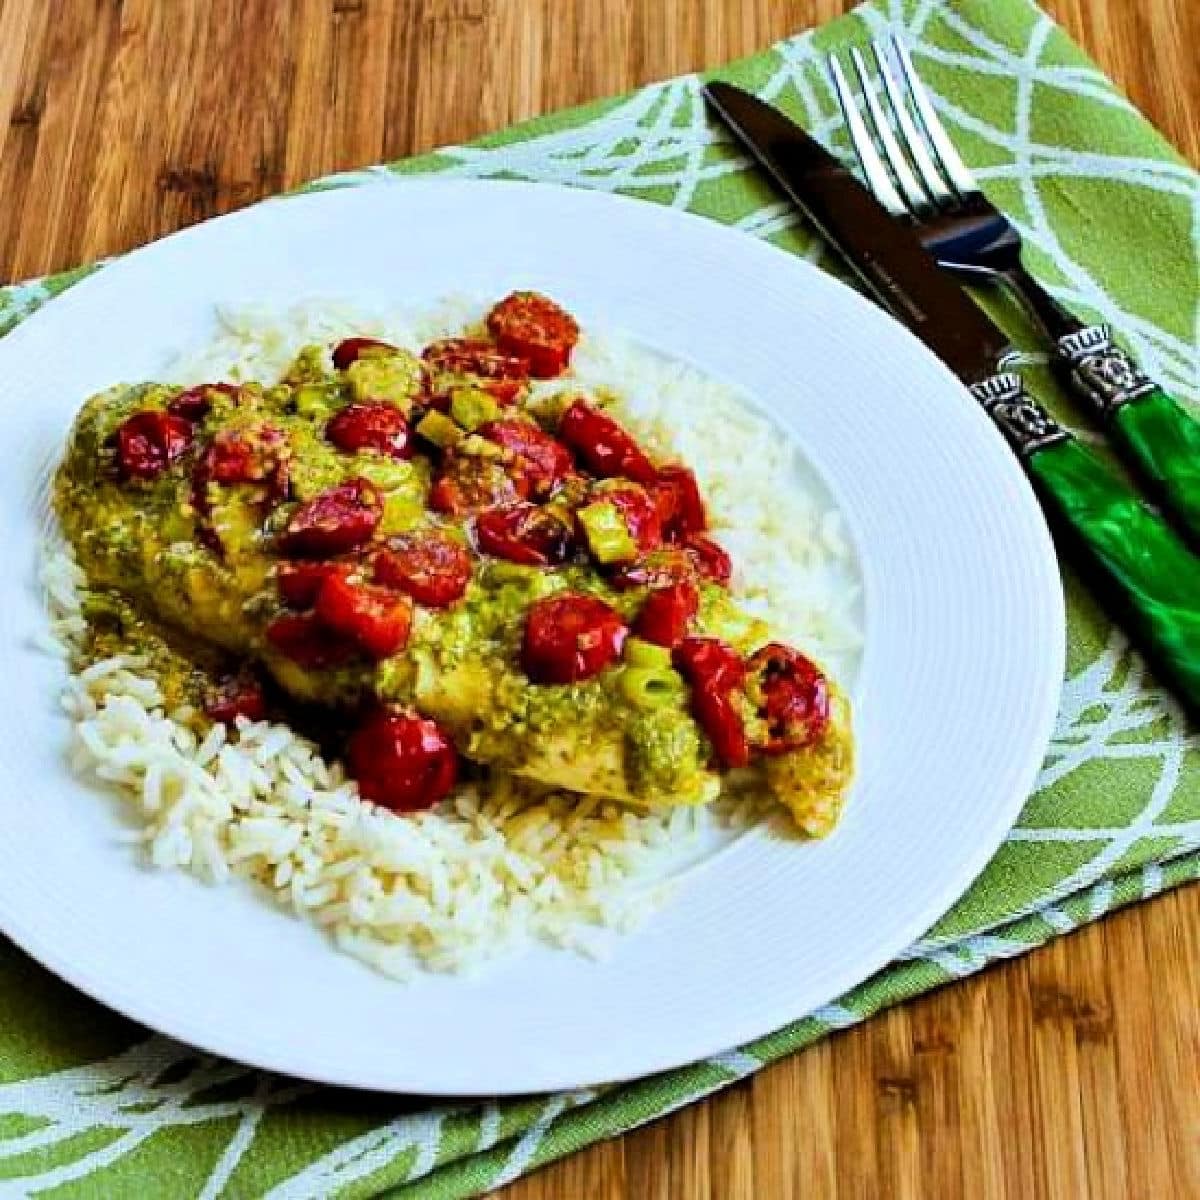 Square image of Baked Fish in Foil with Pesto and Tomatoes on serving plate over rice.